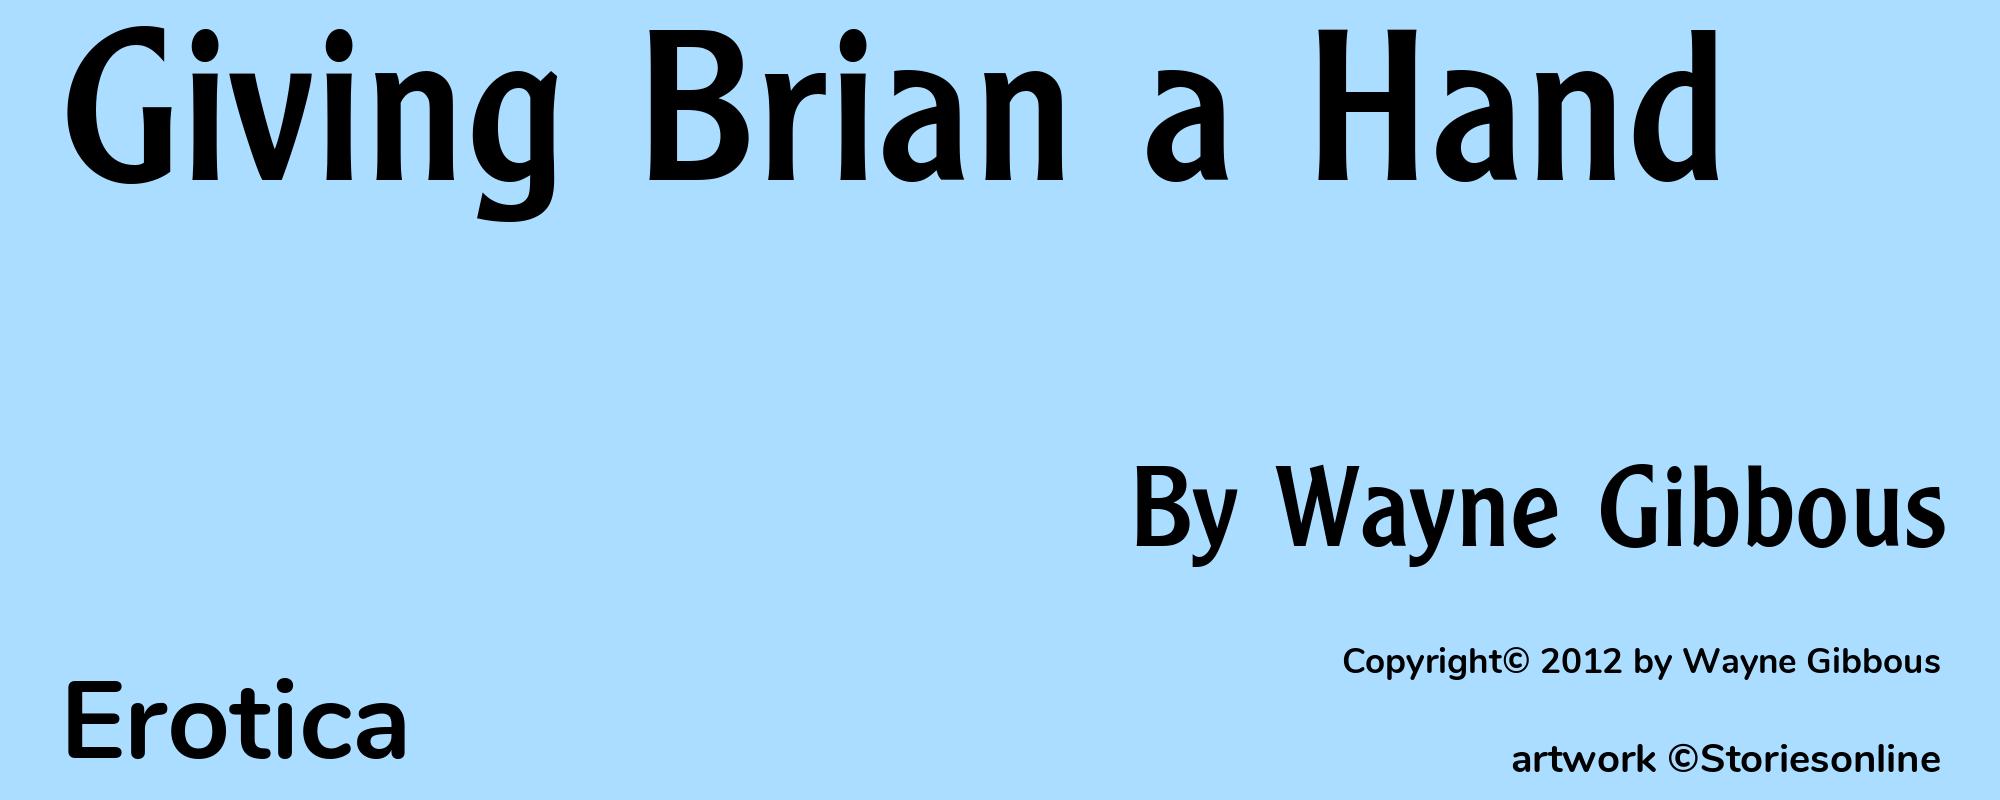 Giving Brian a Hand - Cover